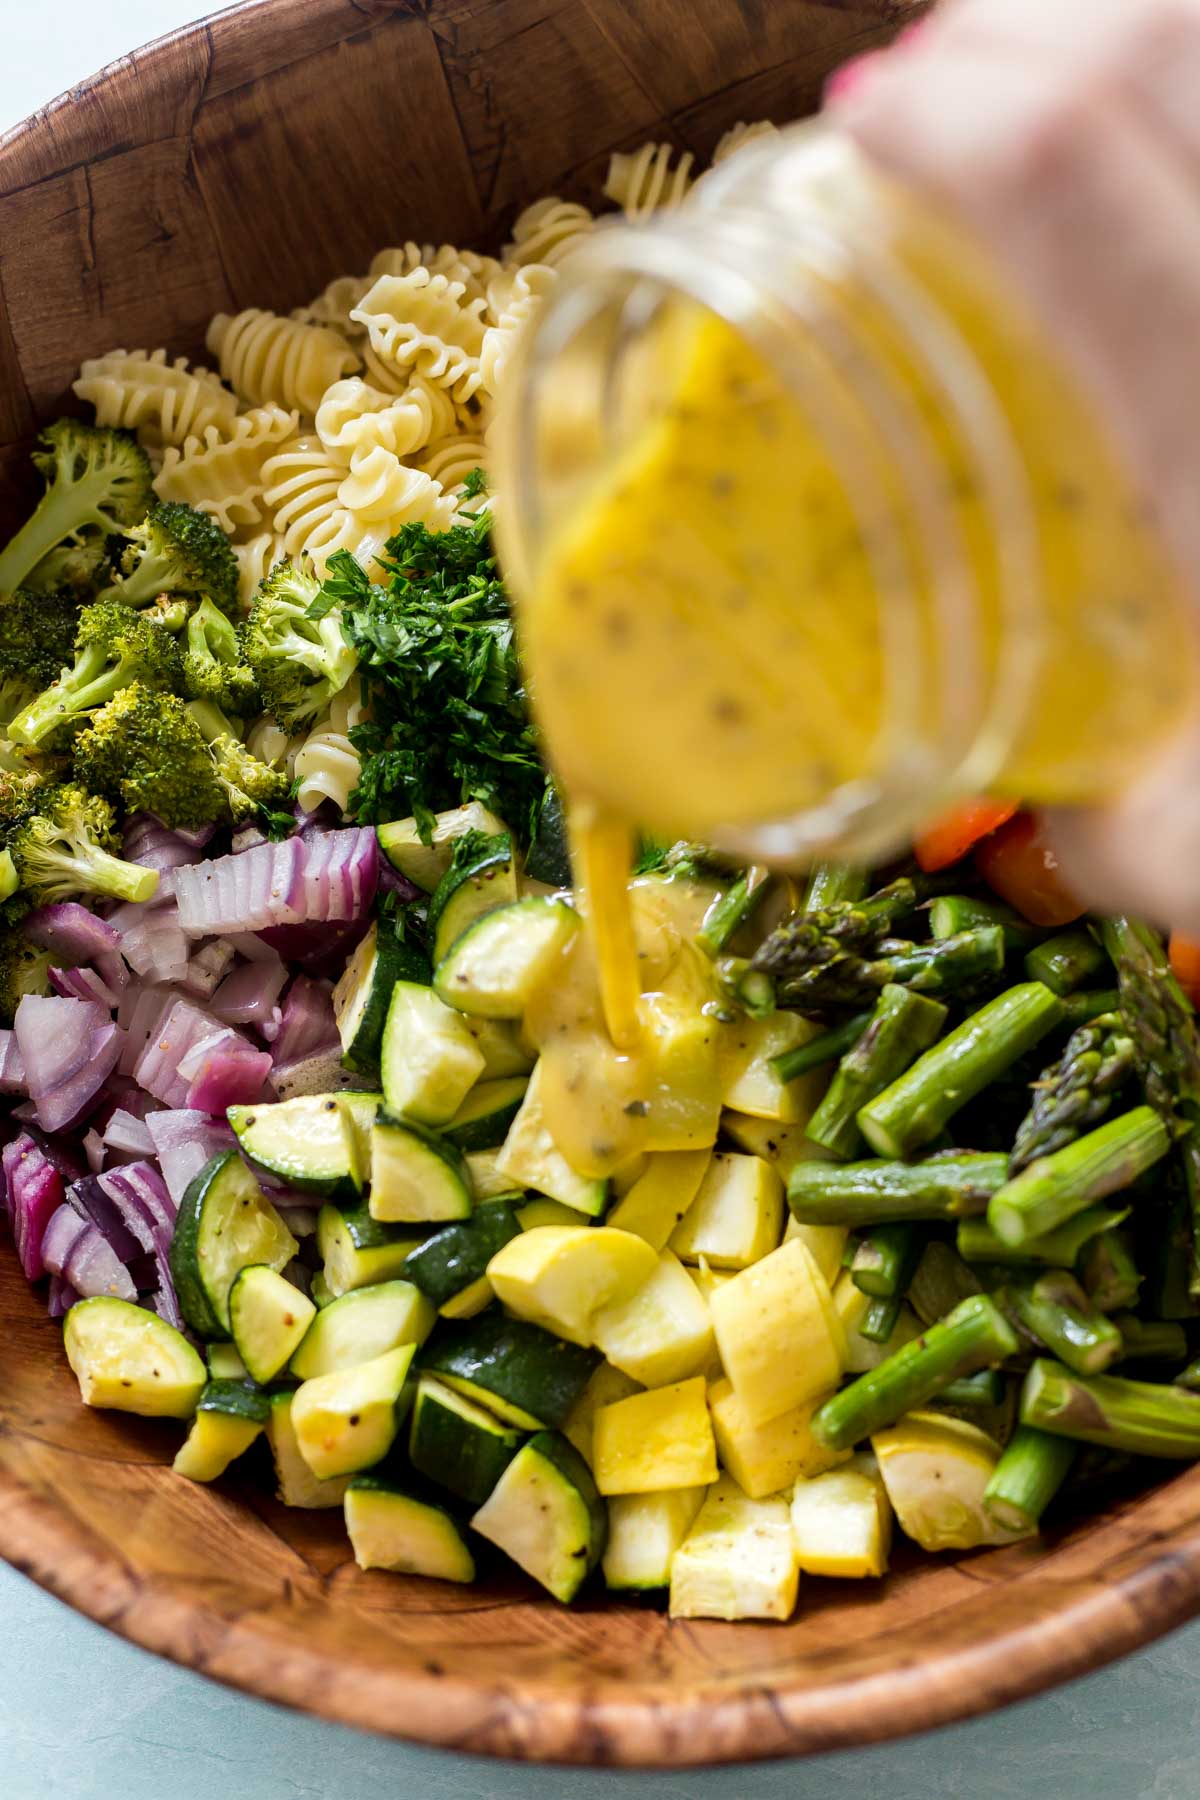 pouring homemade pasta salad dressing into a bowl with the ingredients for a roasted vegetable pasta salad recipe